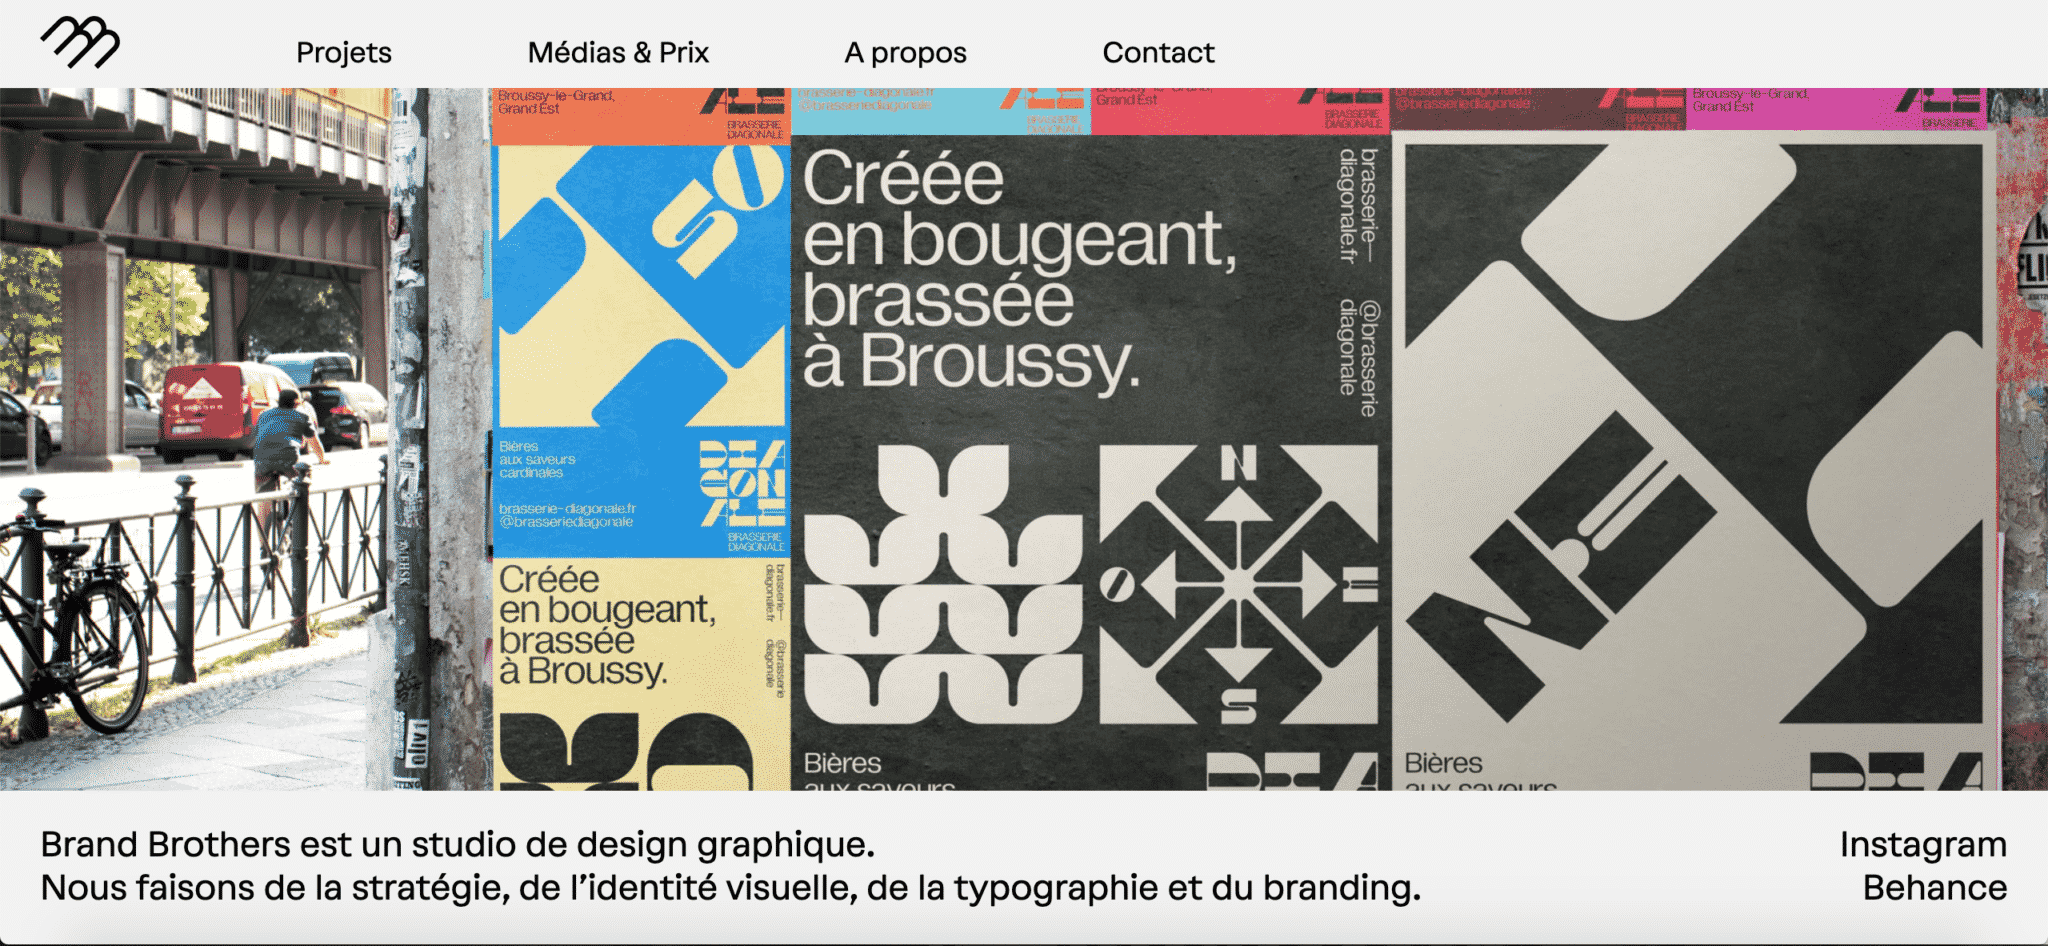 agence-web-design-Brand-Brothers